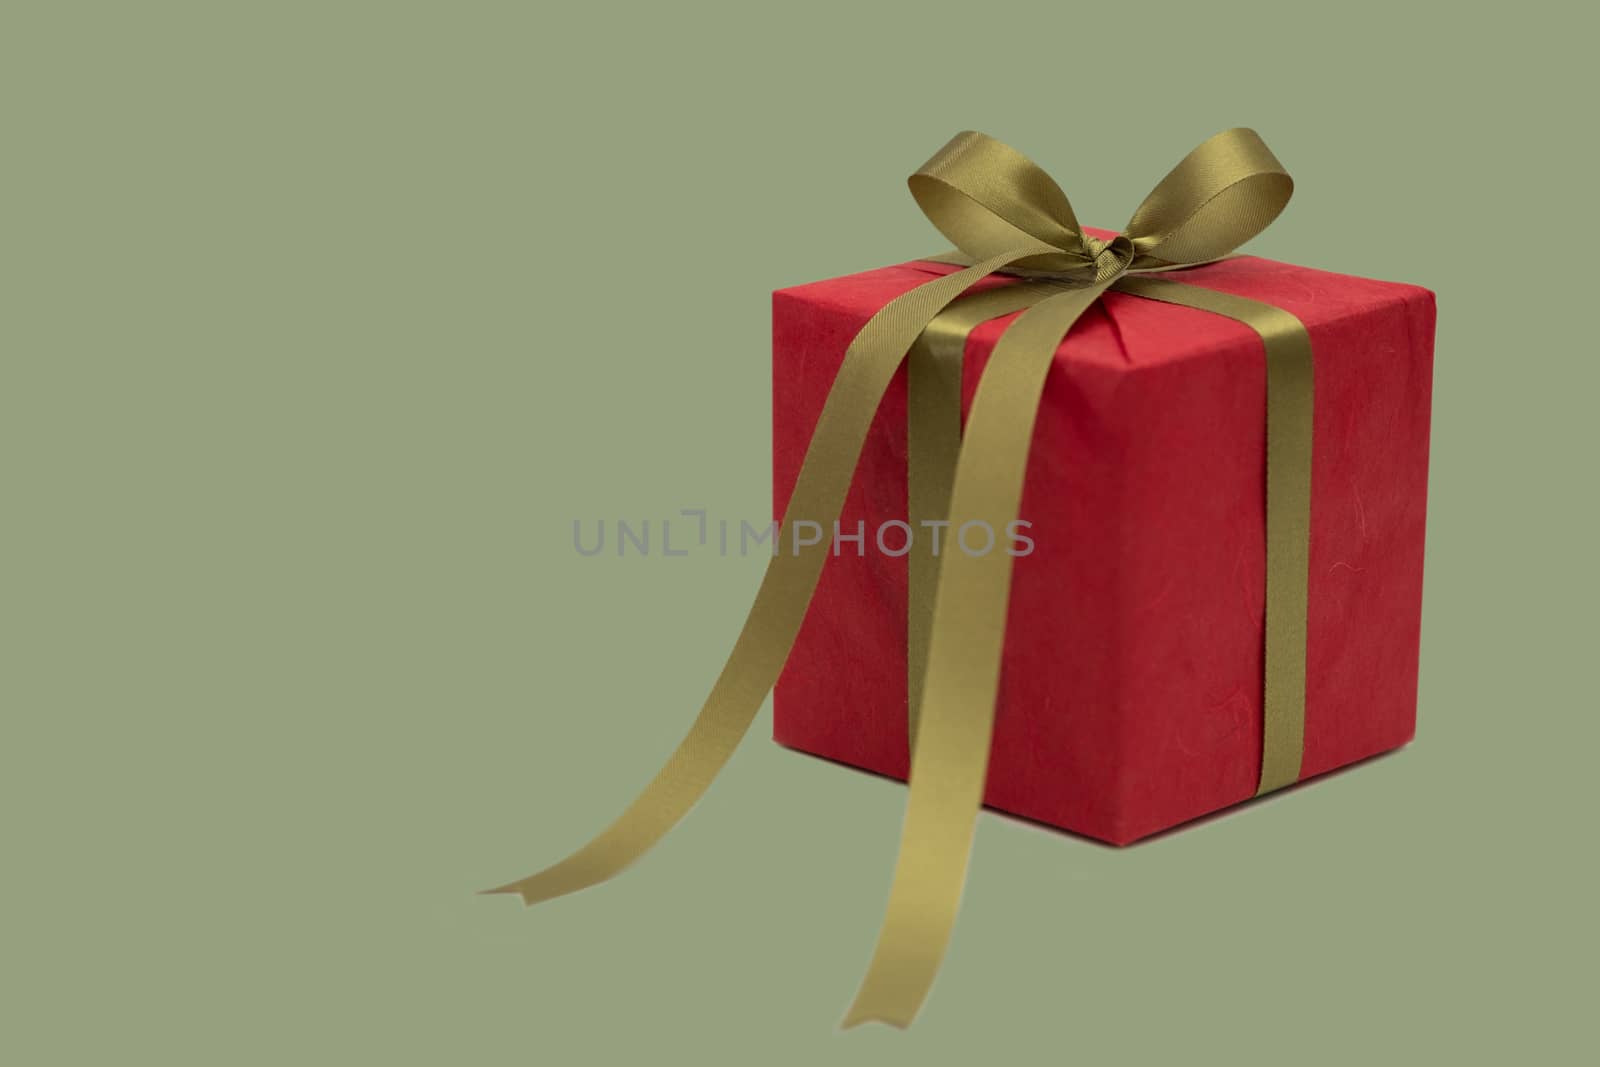 Christmas gren and red gift box isolated on white background, New year and xmas Holiday greeting card.